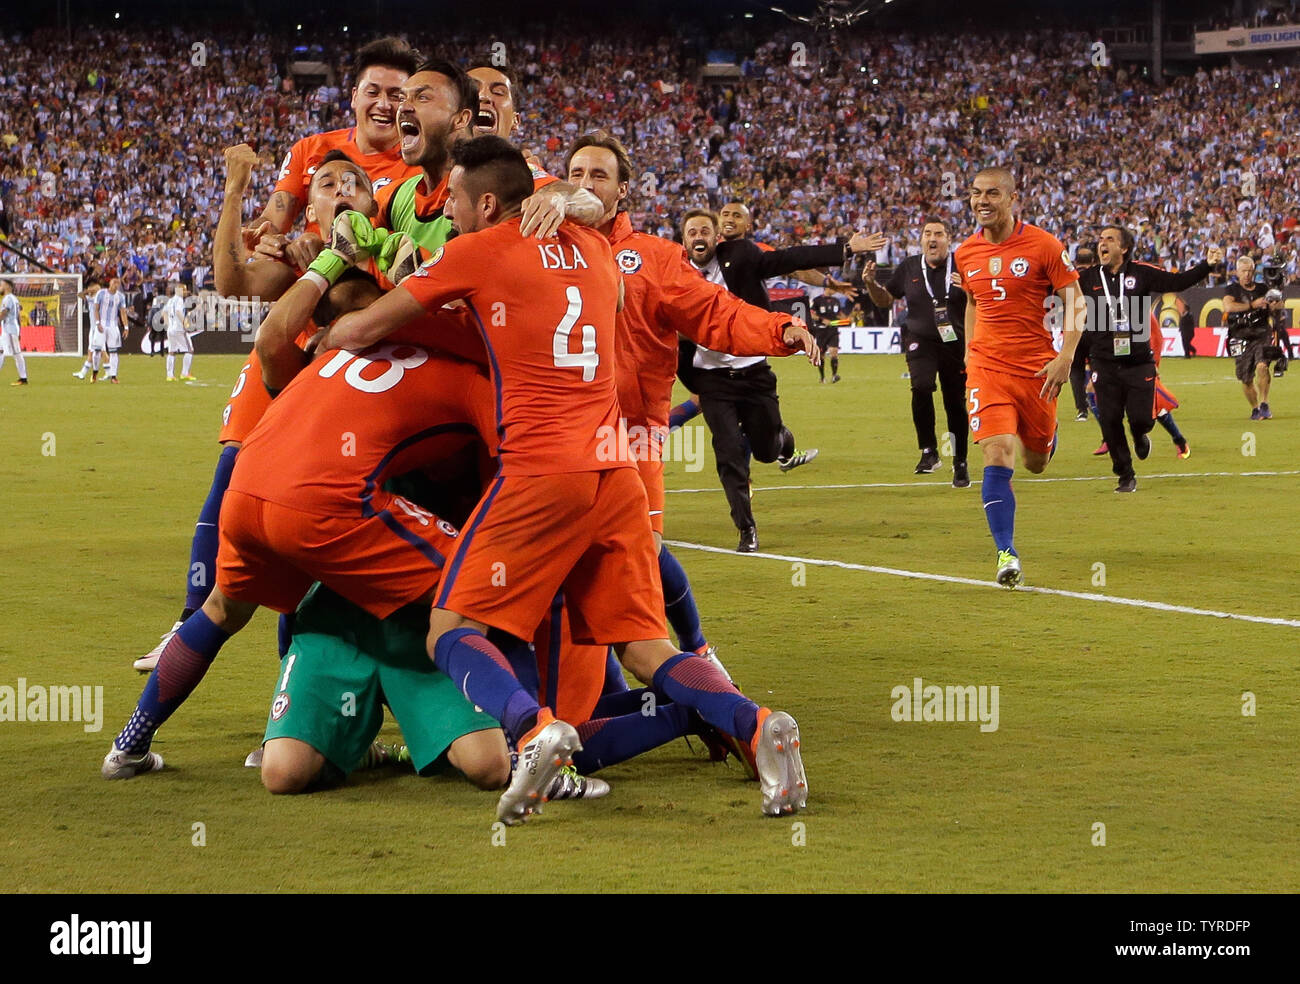 Chile celebrates on top of goalie Chile goalkeeper Claudio Bravo after beating Argentina in the penalty kicks phase at the Copa America Centenario USA 2016 Finals at MetLife Stadium in East Rutherford, New Jersey on June 26, 2016.      Photo by Ray Stubblebine/UPI Stock Photo